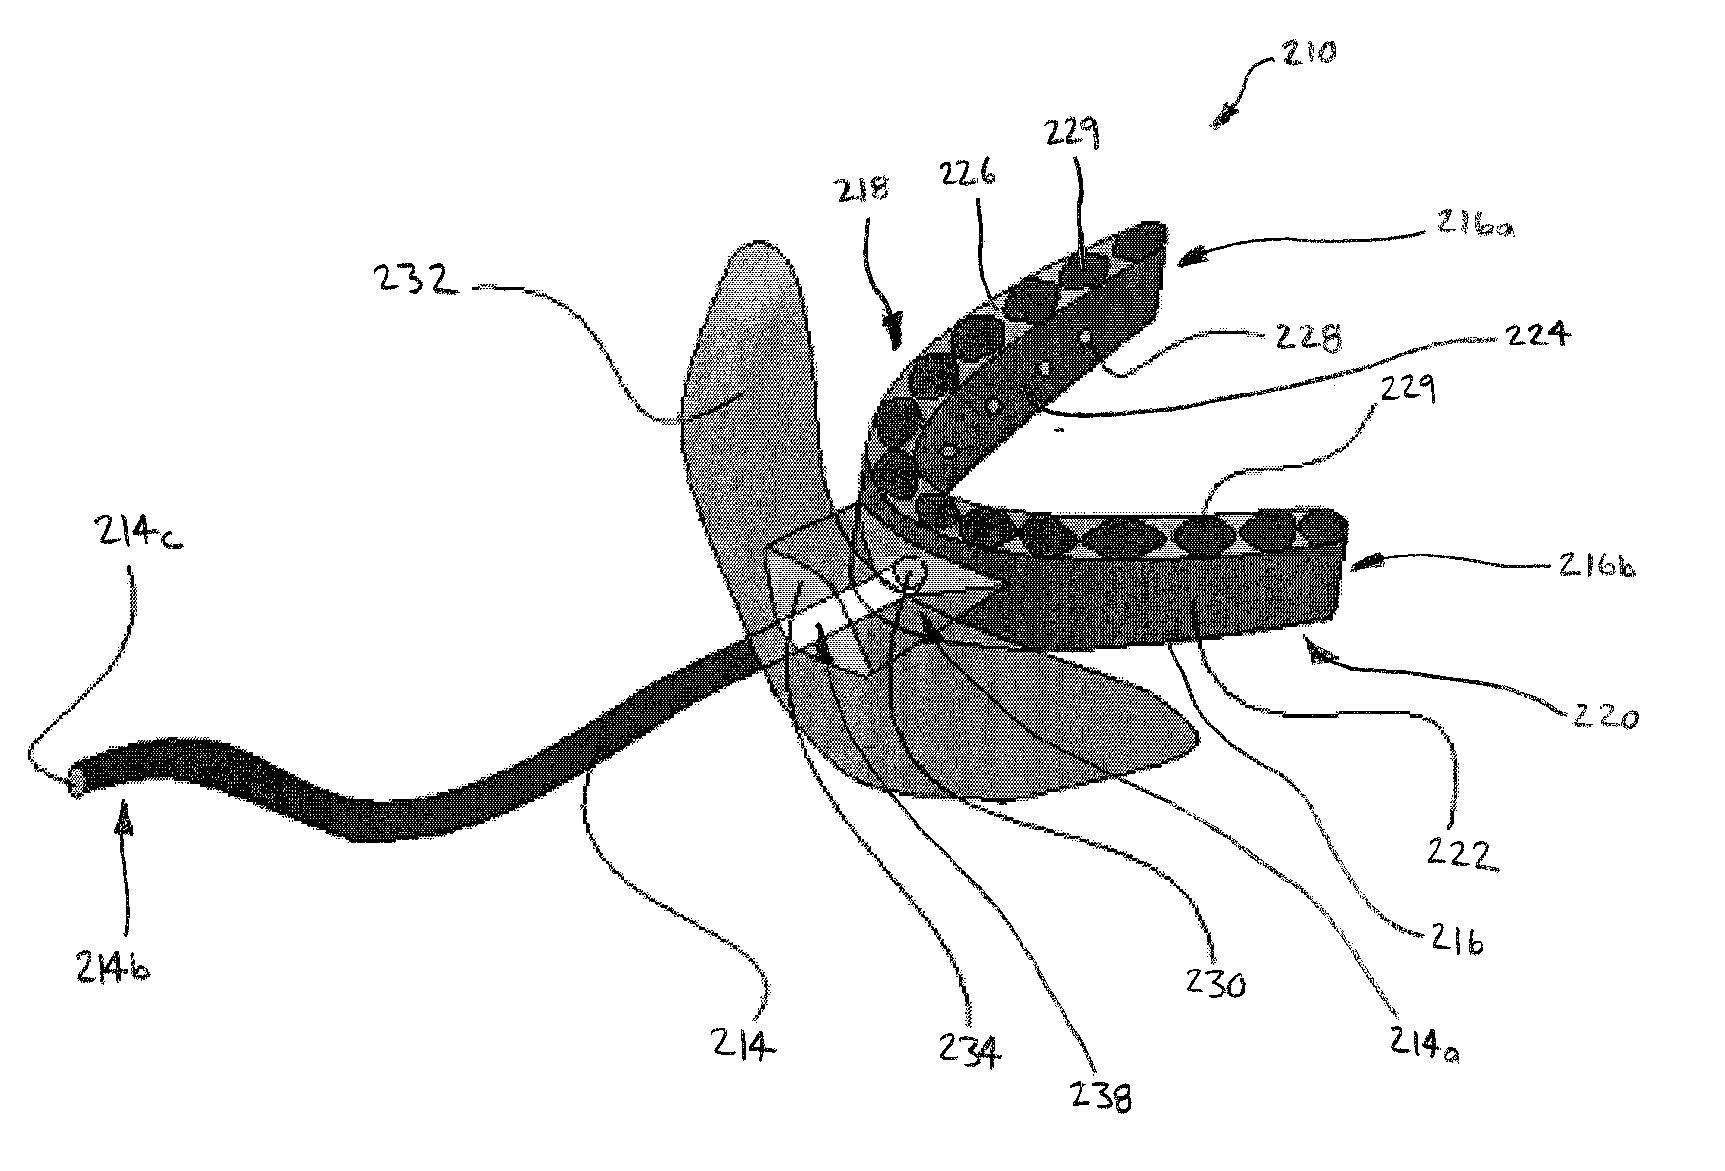 Methods and devices for relieving upper airway obstructions